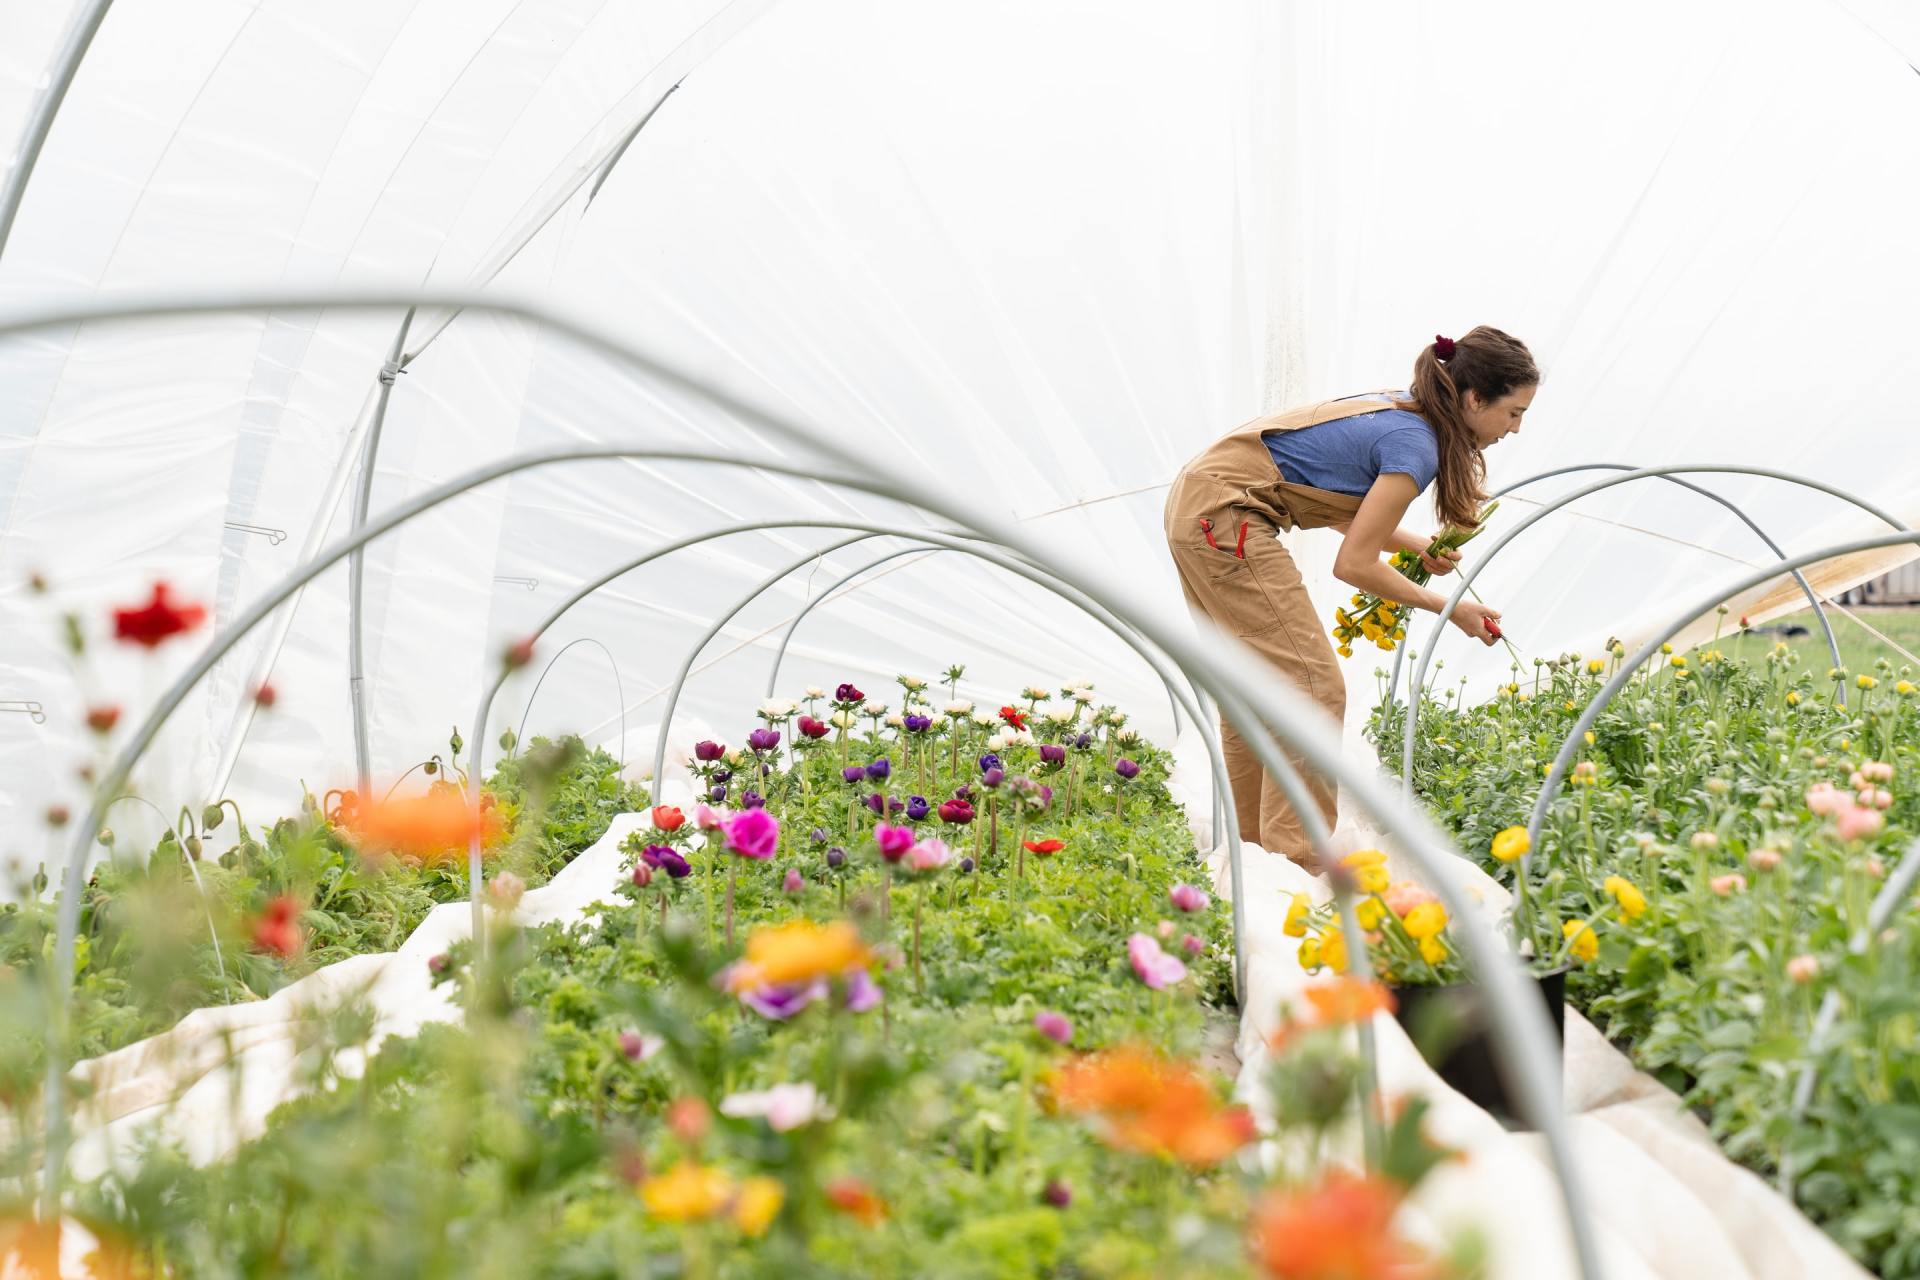 a woman is working in a greenhouse full of flowers